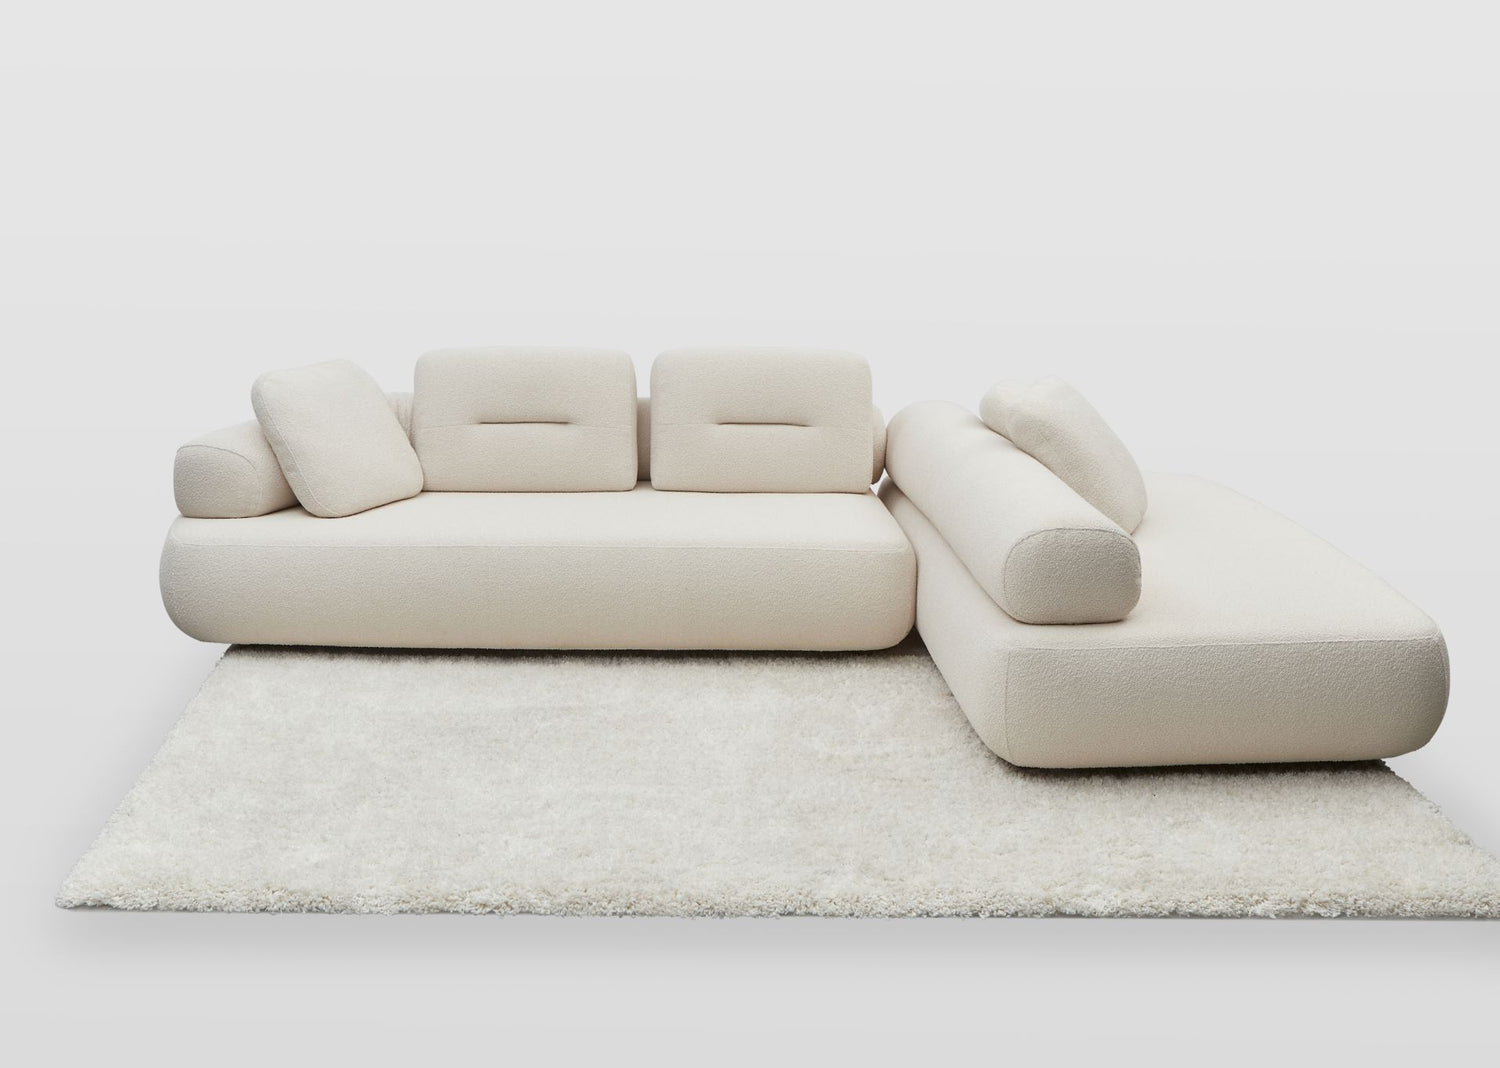 Newman designer sofa and chaise with chaise roll re-orientated to face other direction